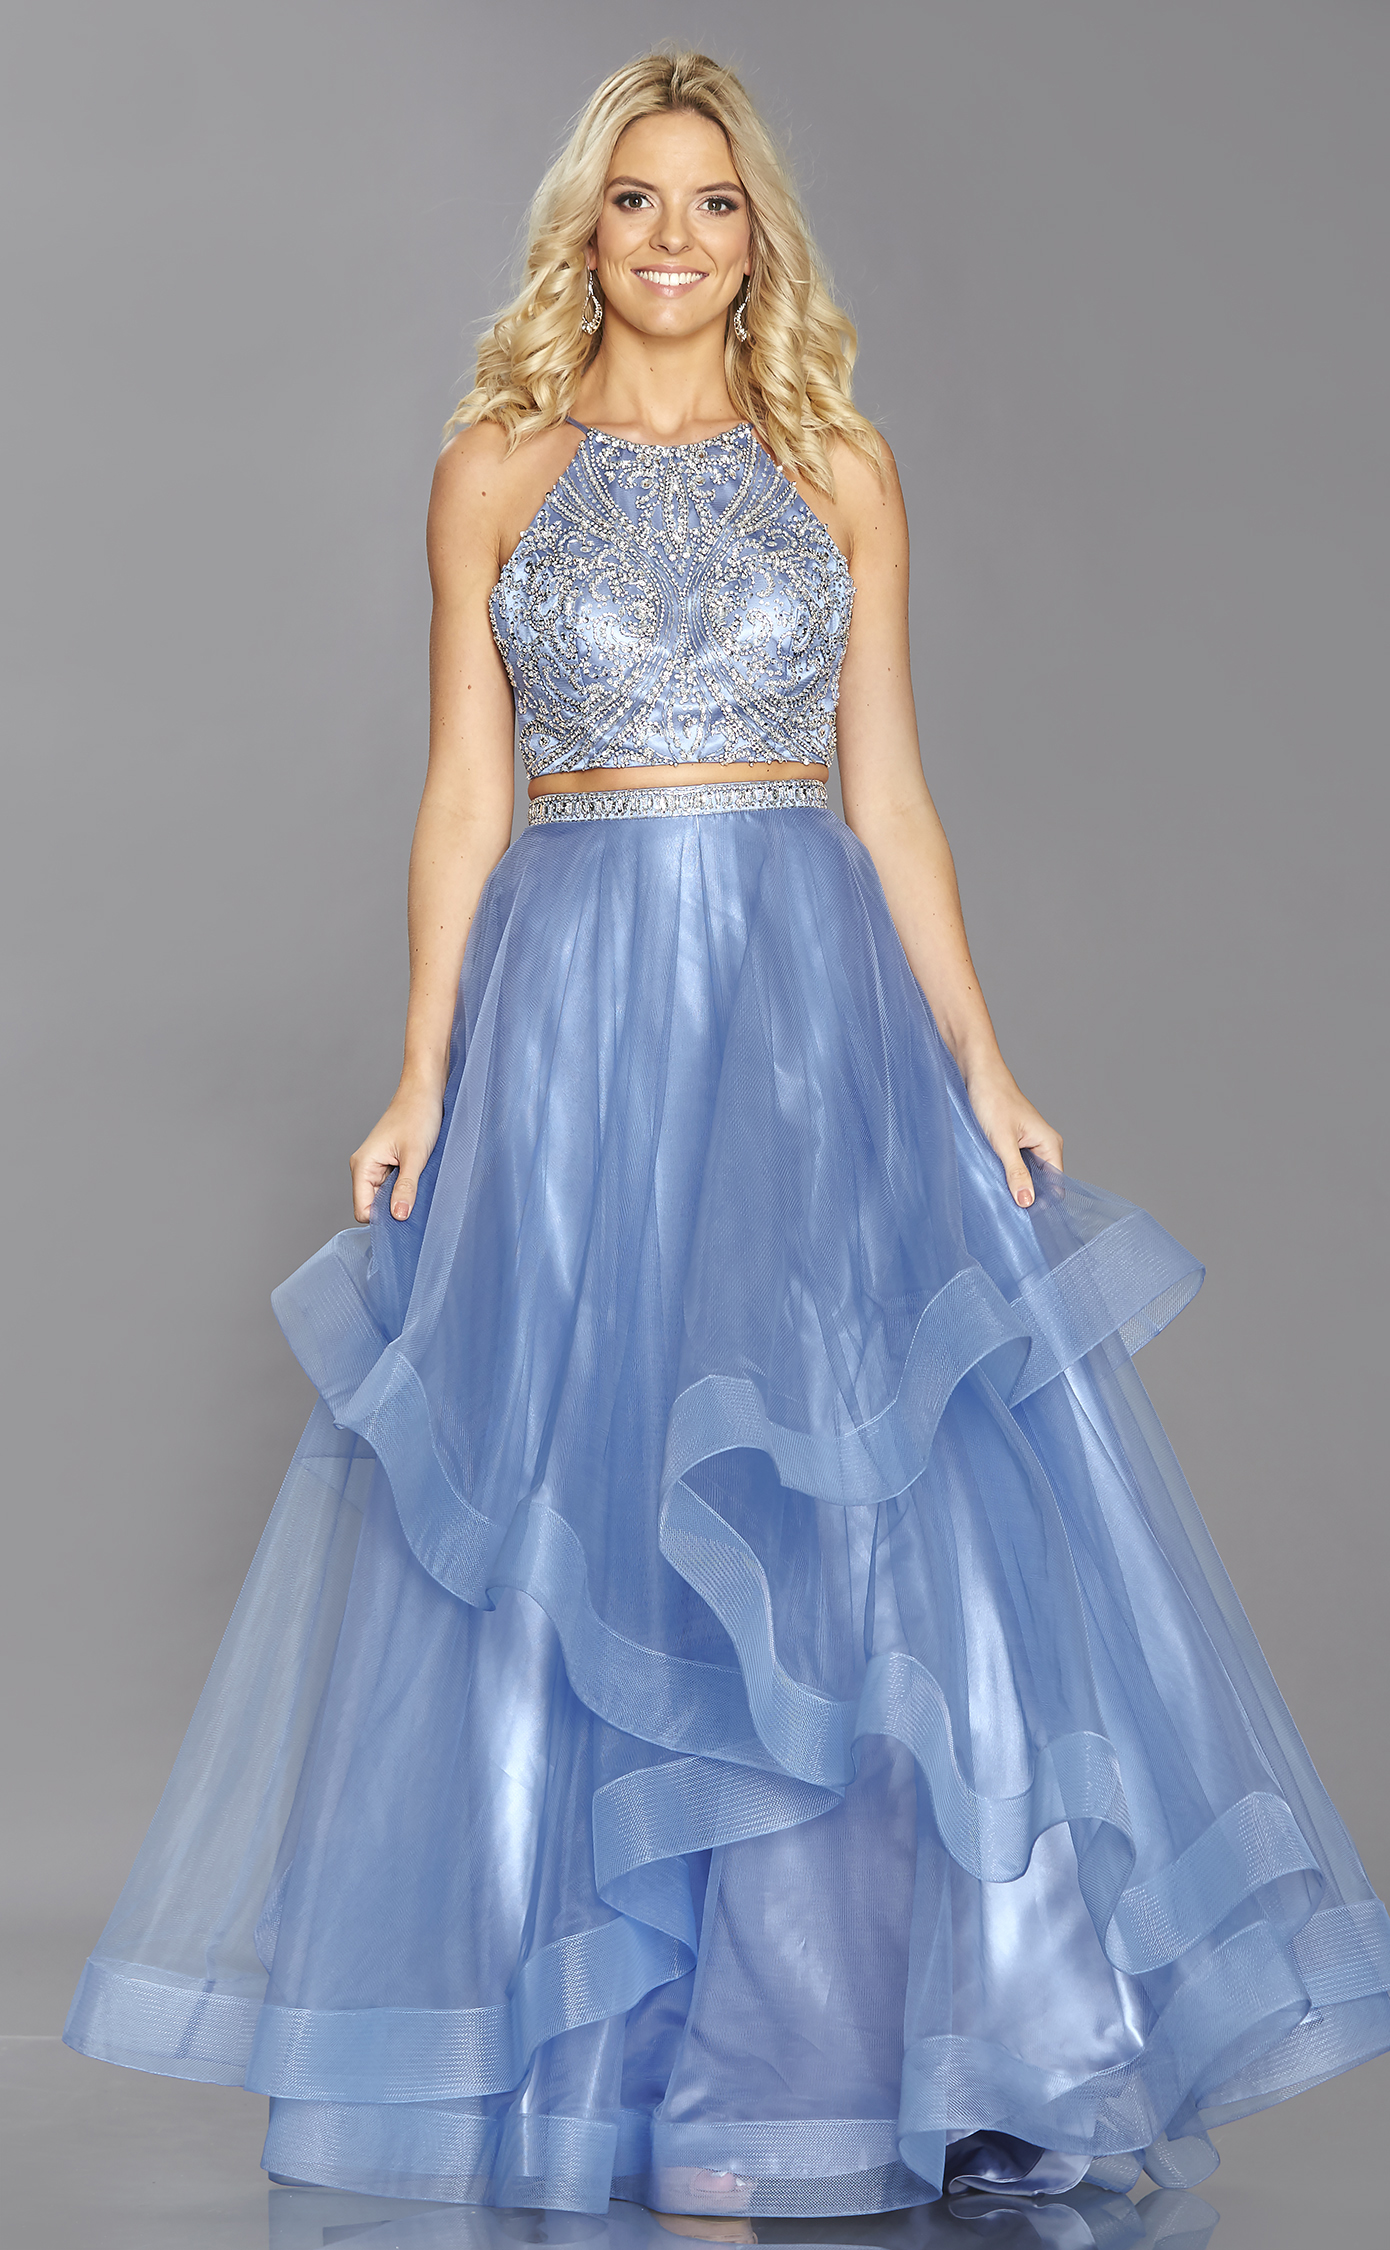 Amazing Layered Tulle Ball Gown Prom Dresses 2019 Bright 